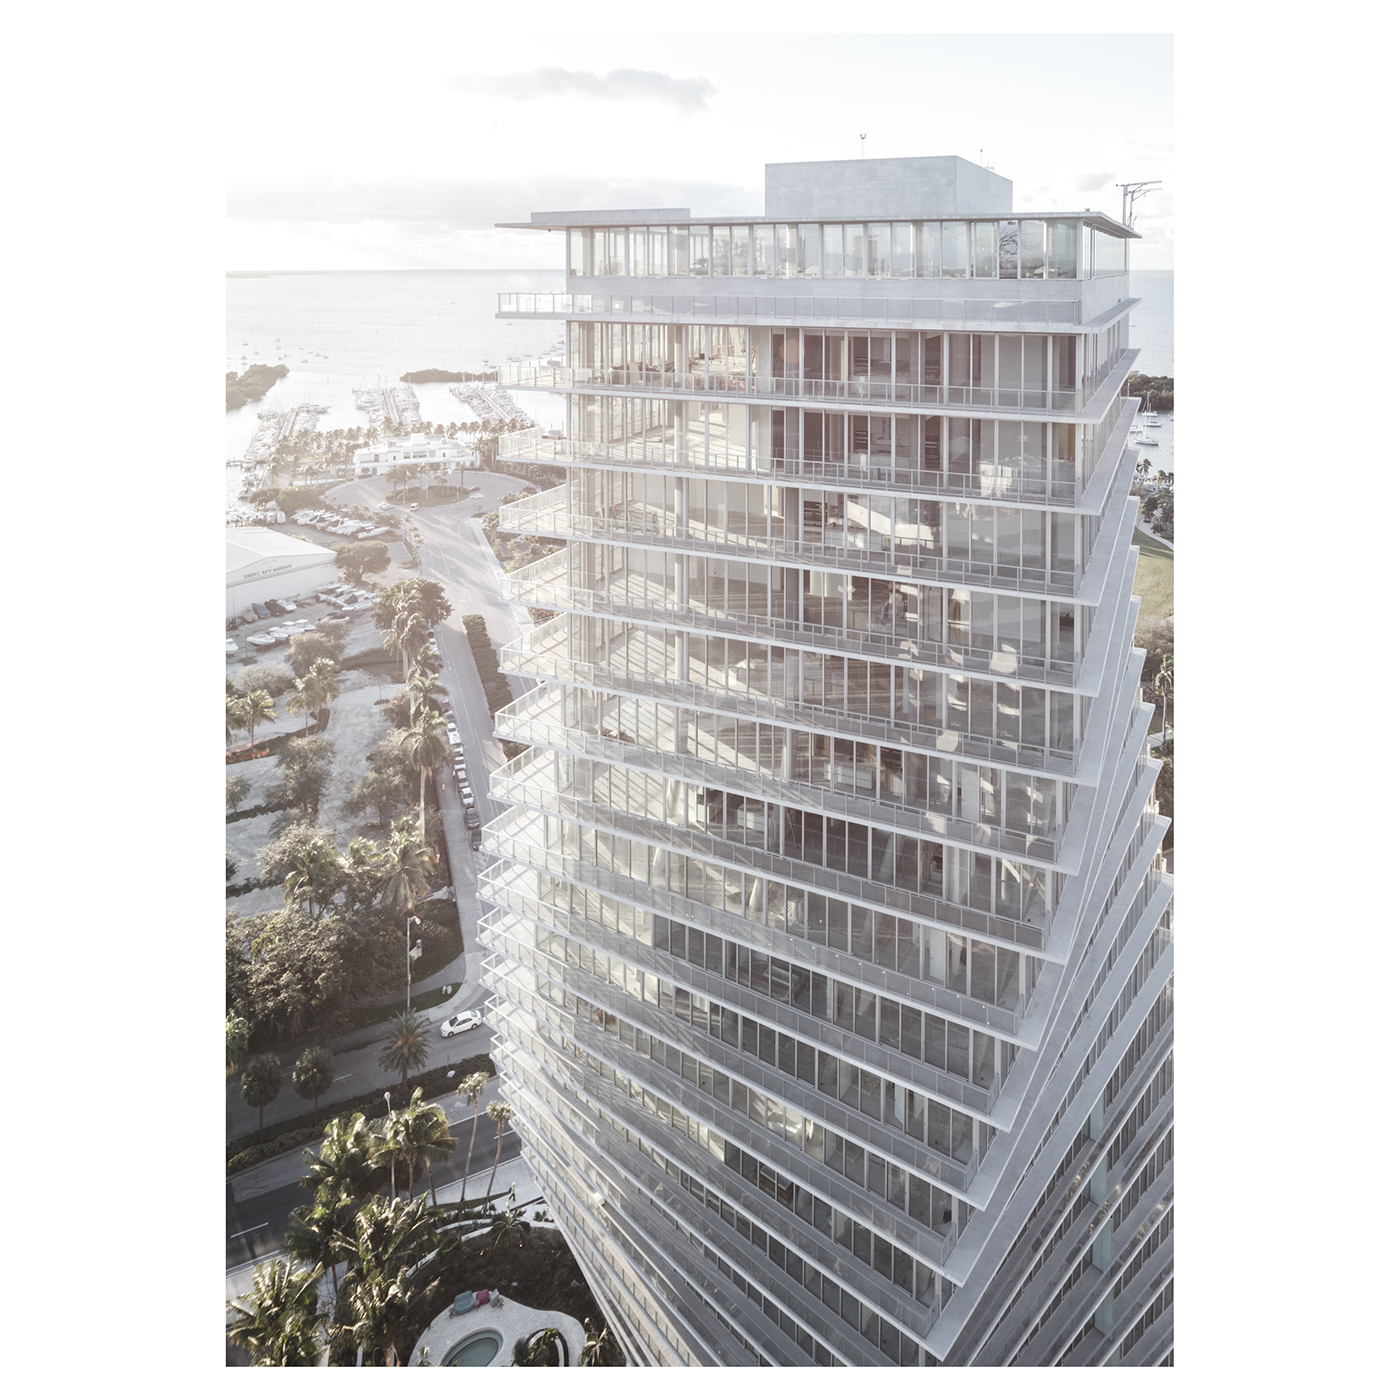 big Bjarke Ingels group miami residential towers architecture design concrete